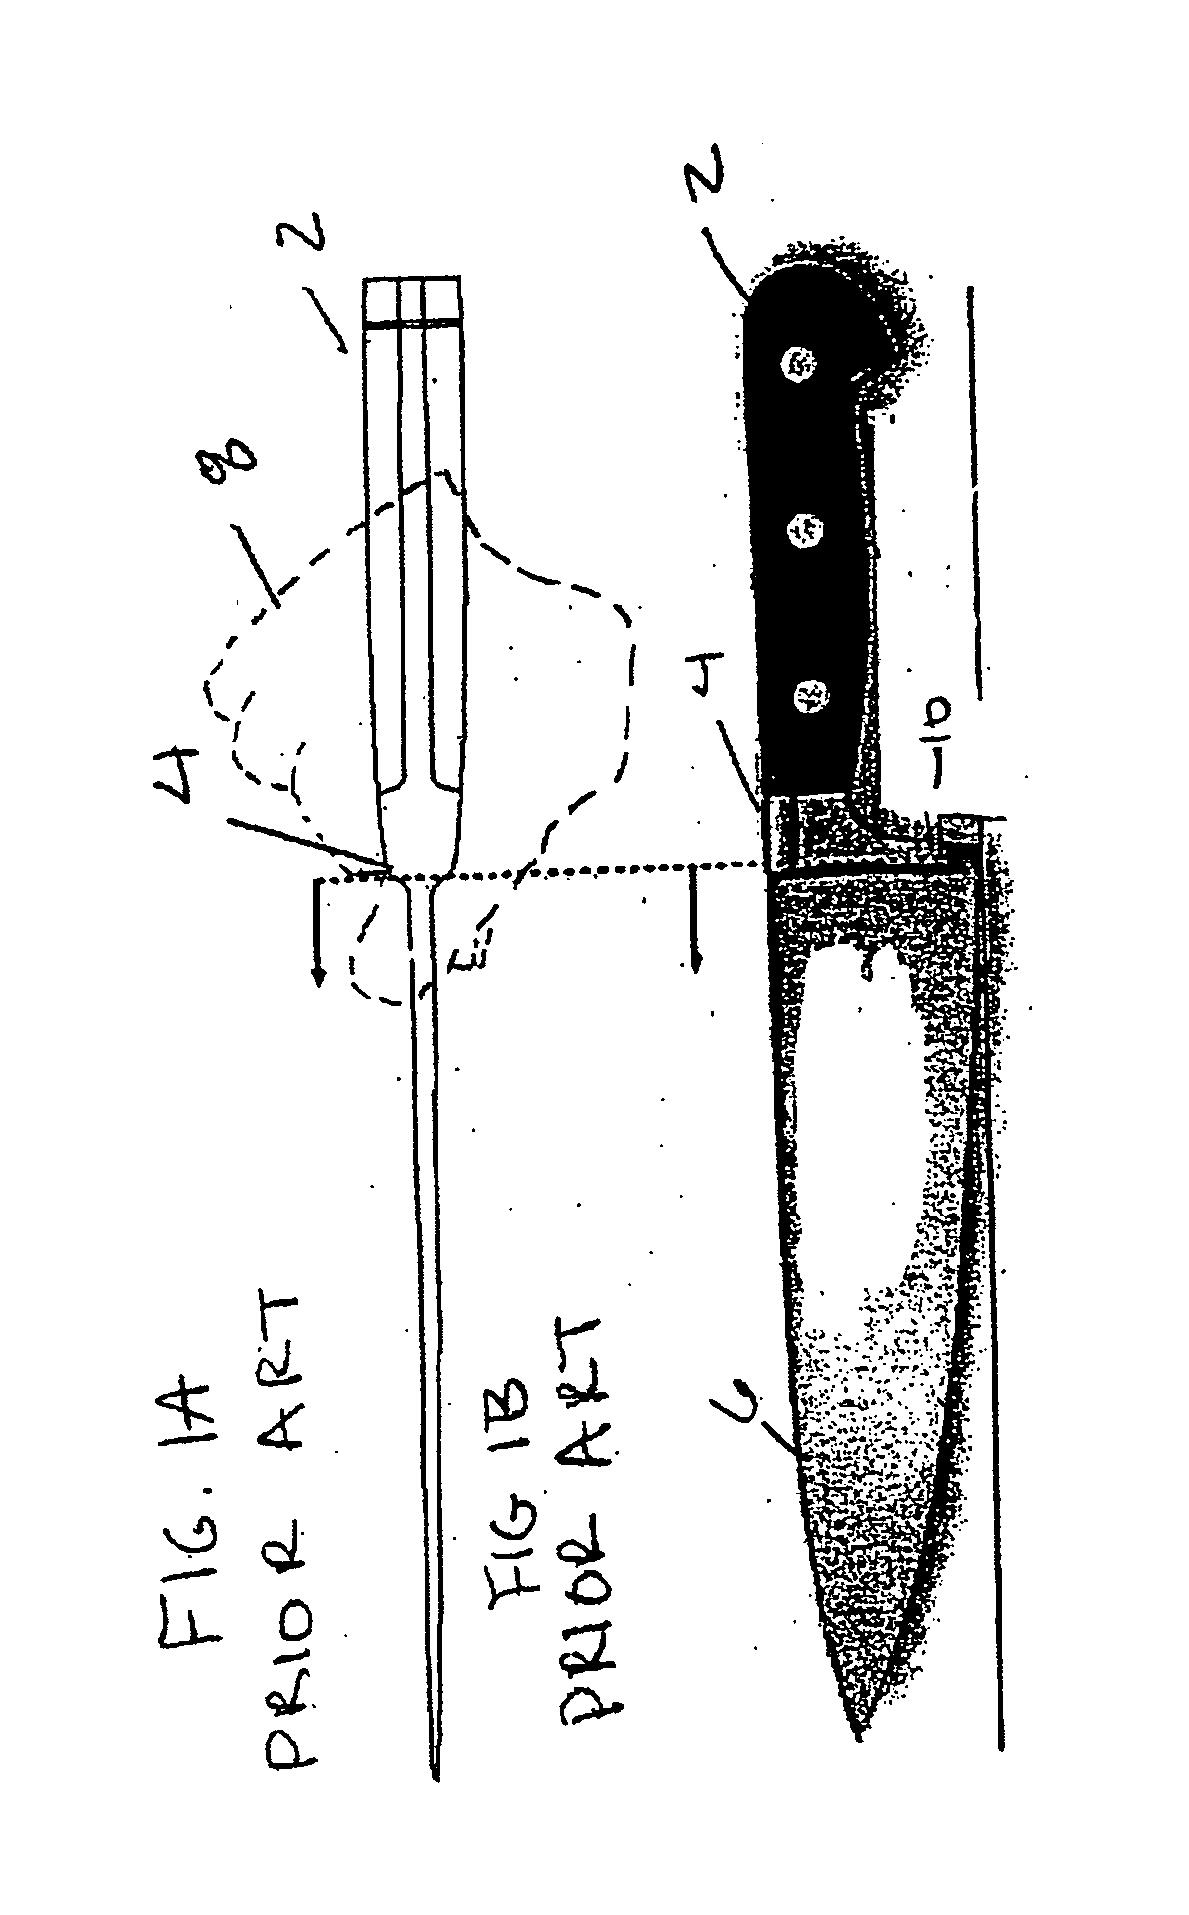 Cutlery implement and block